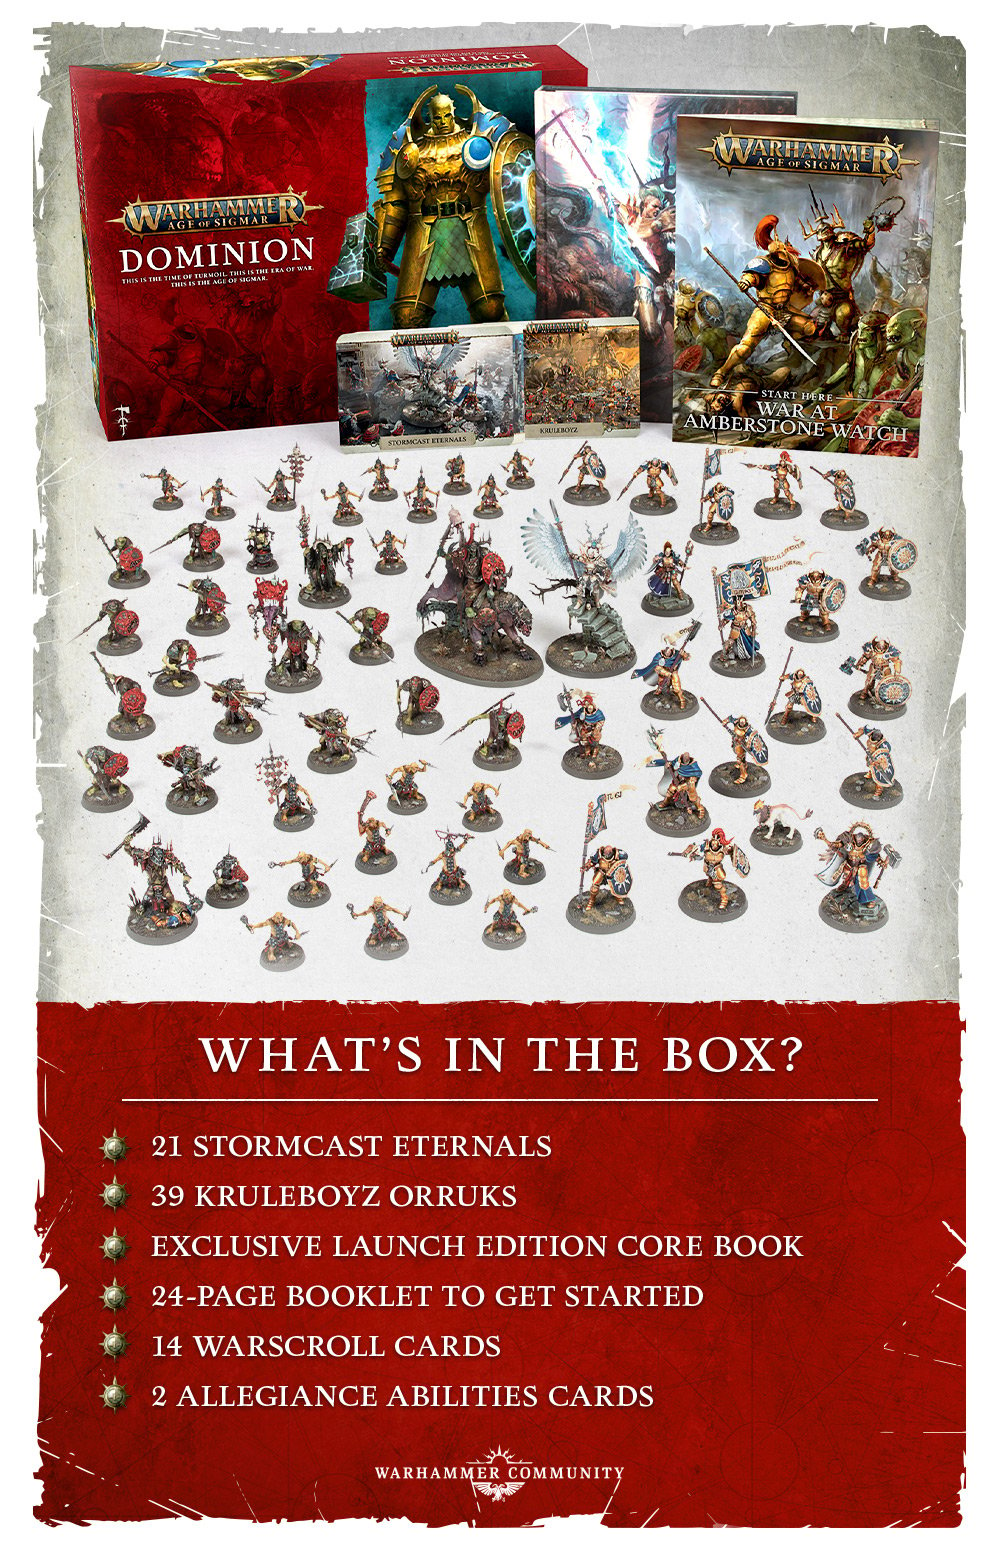 Image of the box and contents of Dominion:  21 Stormcast eternals, 39 orks, two rulebooks and 16 cards.